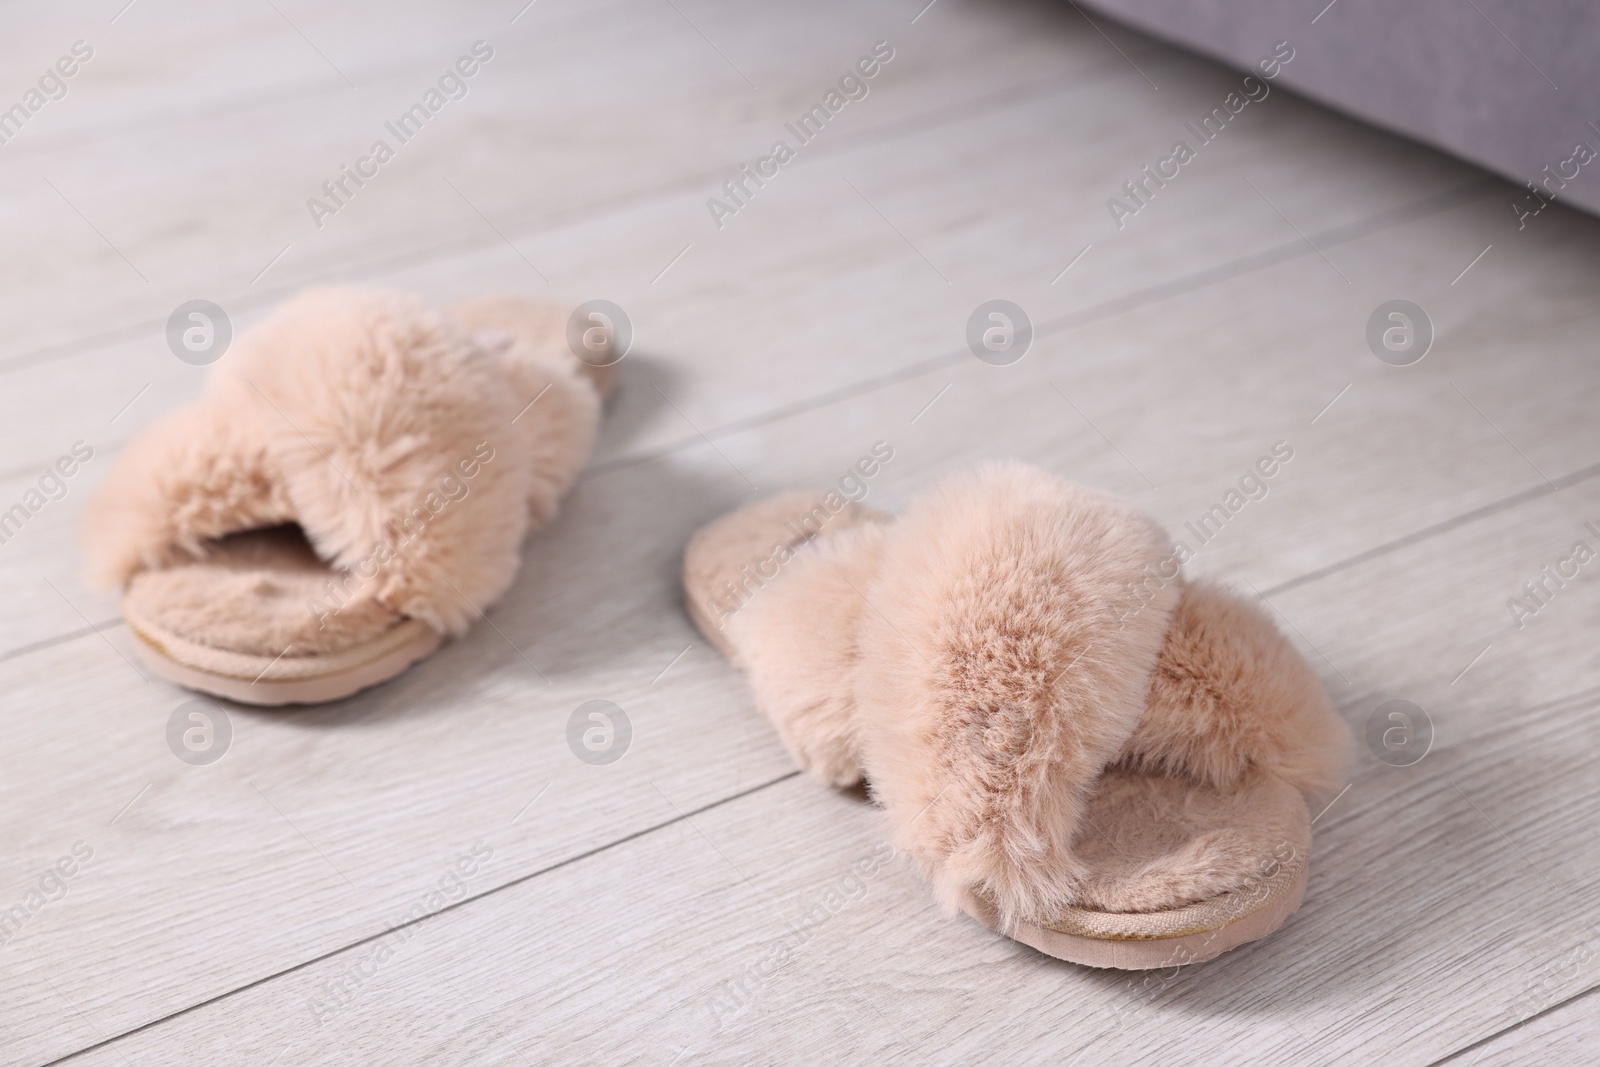 Photo of Beige soft slippers on light wooden floor at home